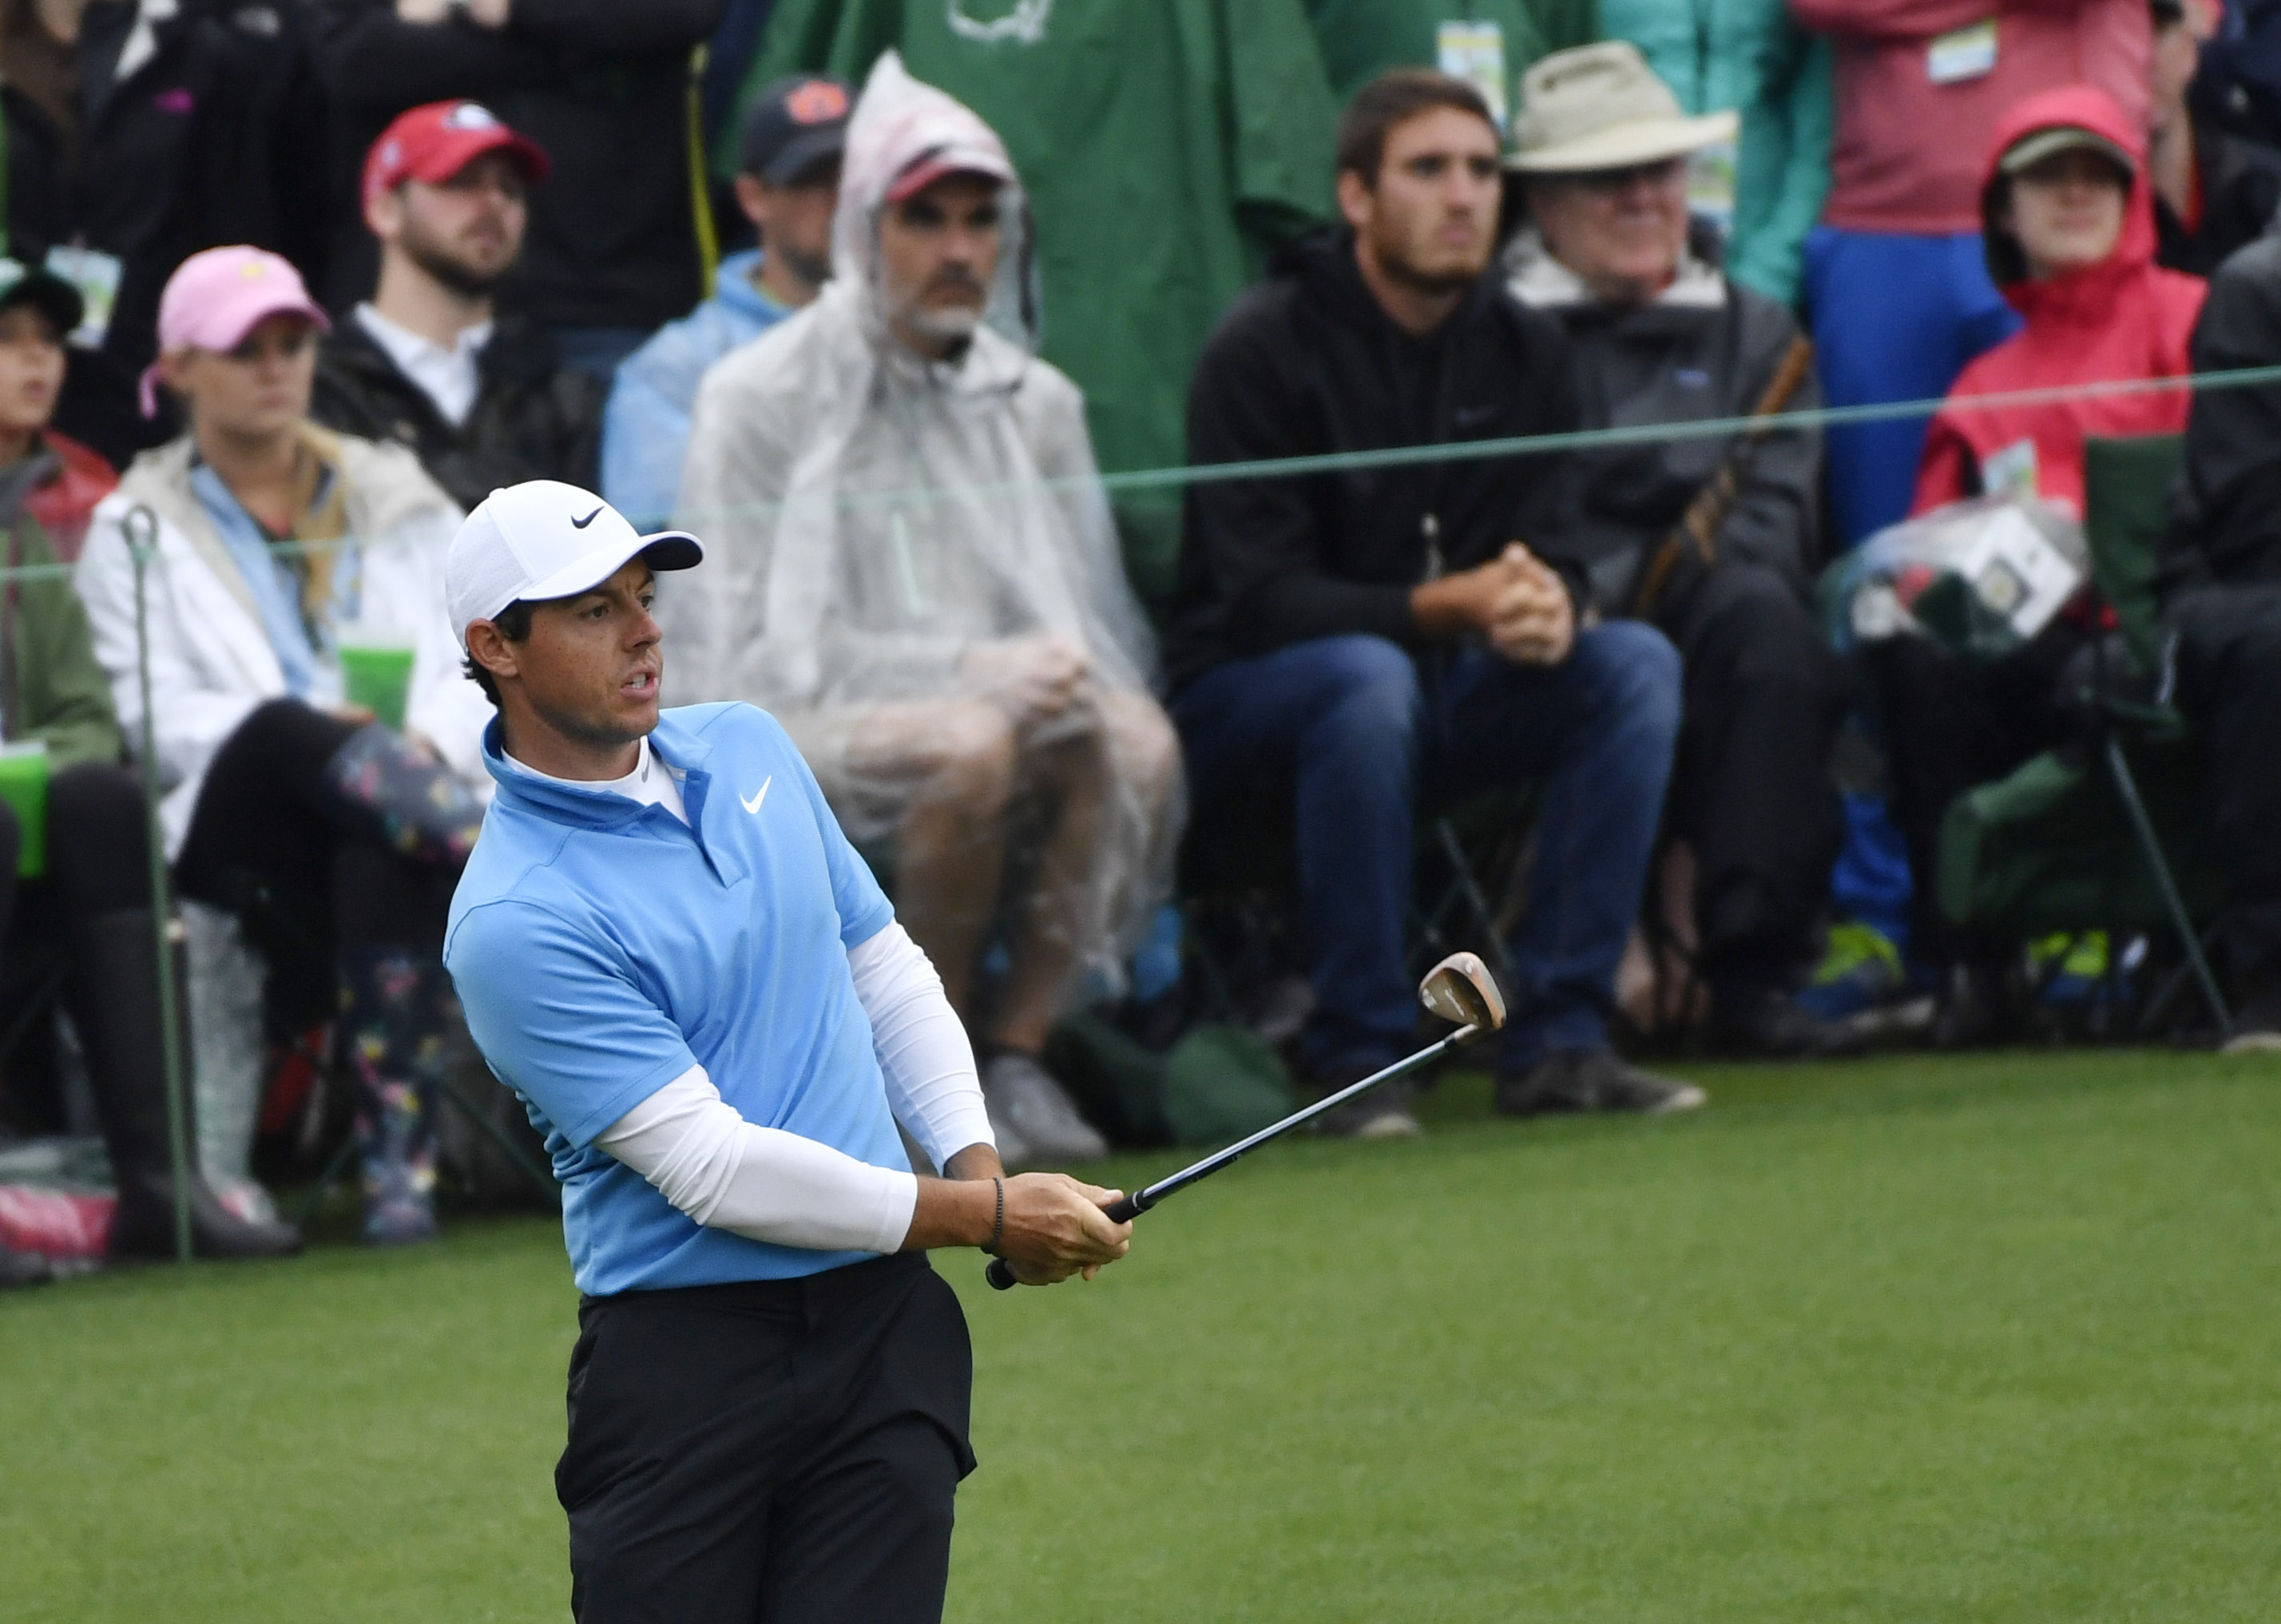 Confident McIlroy ready to seize shot at career Grand Slam